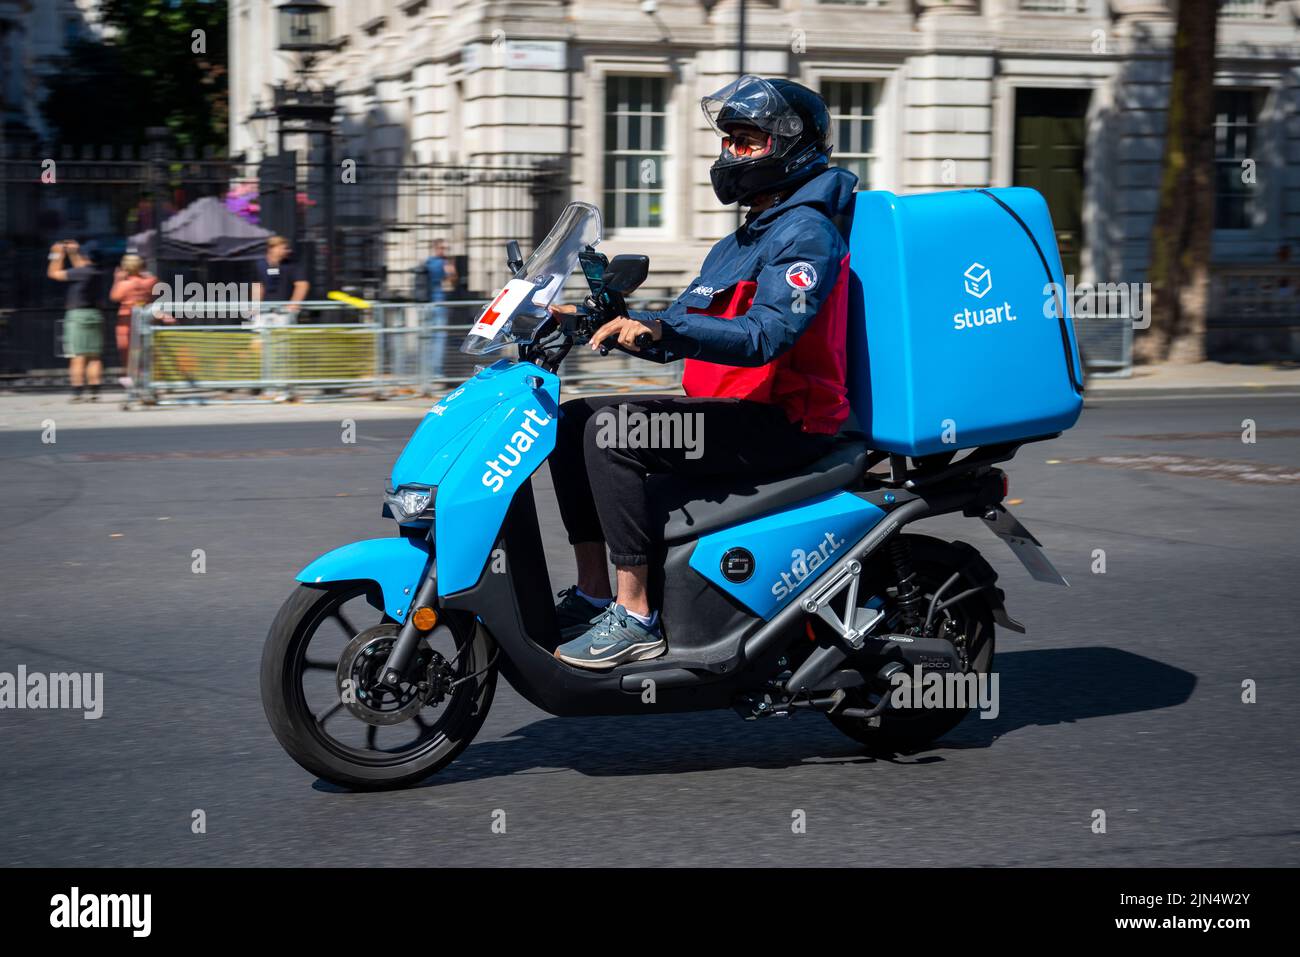 stuart courier delivery motorbike on Whitehall, Westminster, London, UK. An on-demand logistics business. Super Soco electric motorcycle. Vmoto soco Stock Photo